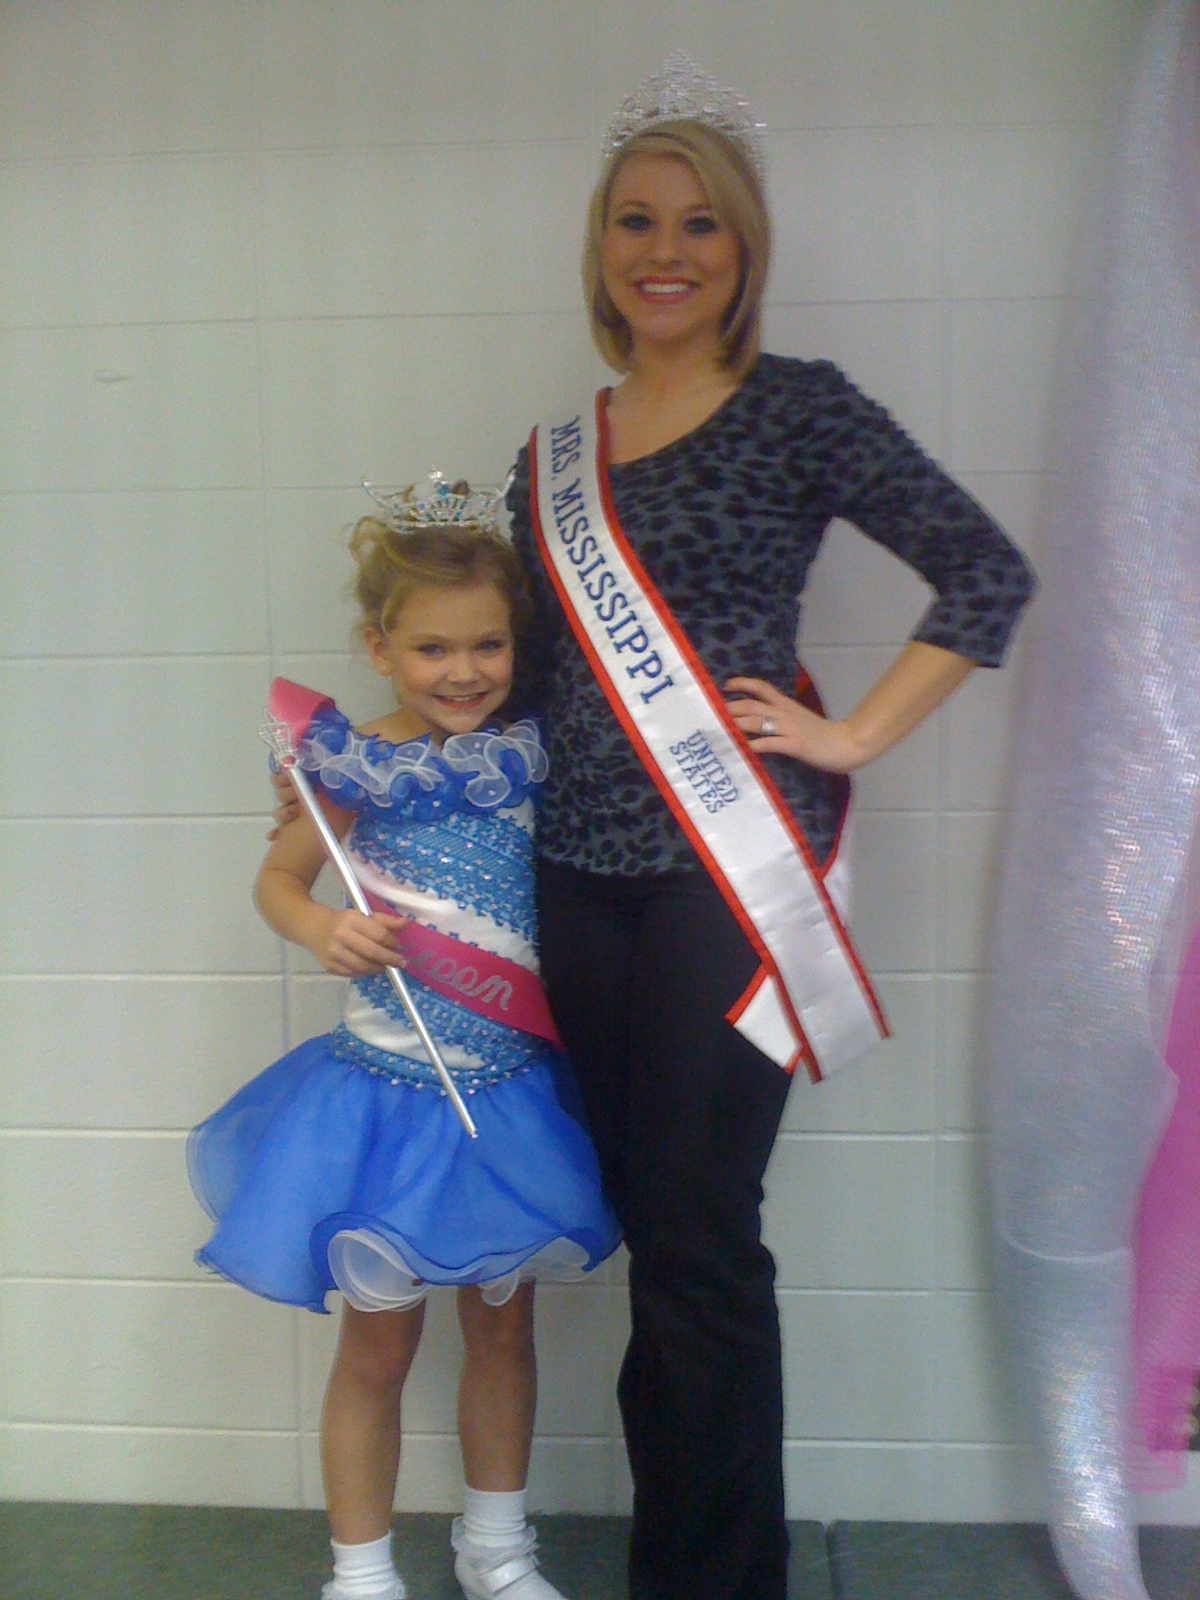 Little Miss America pageant